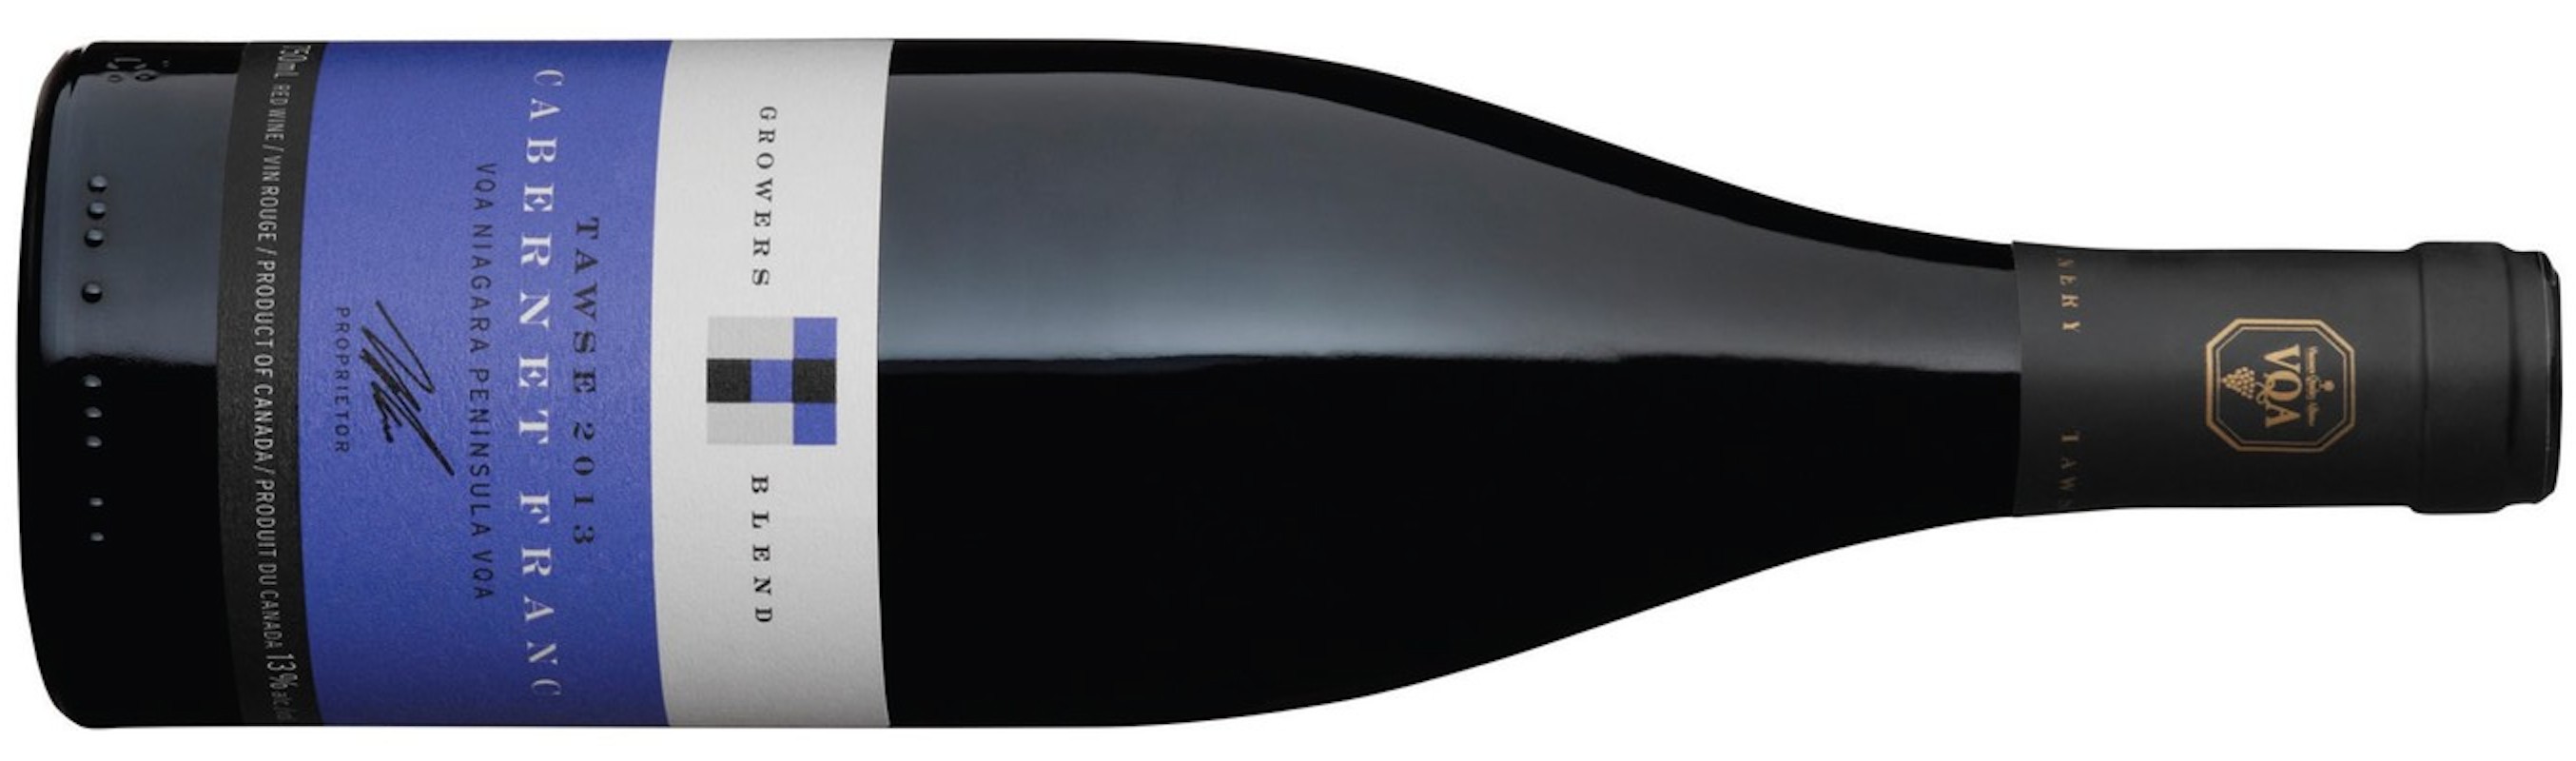 a2013_growers_cab_franc